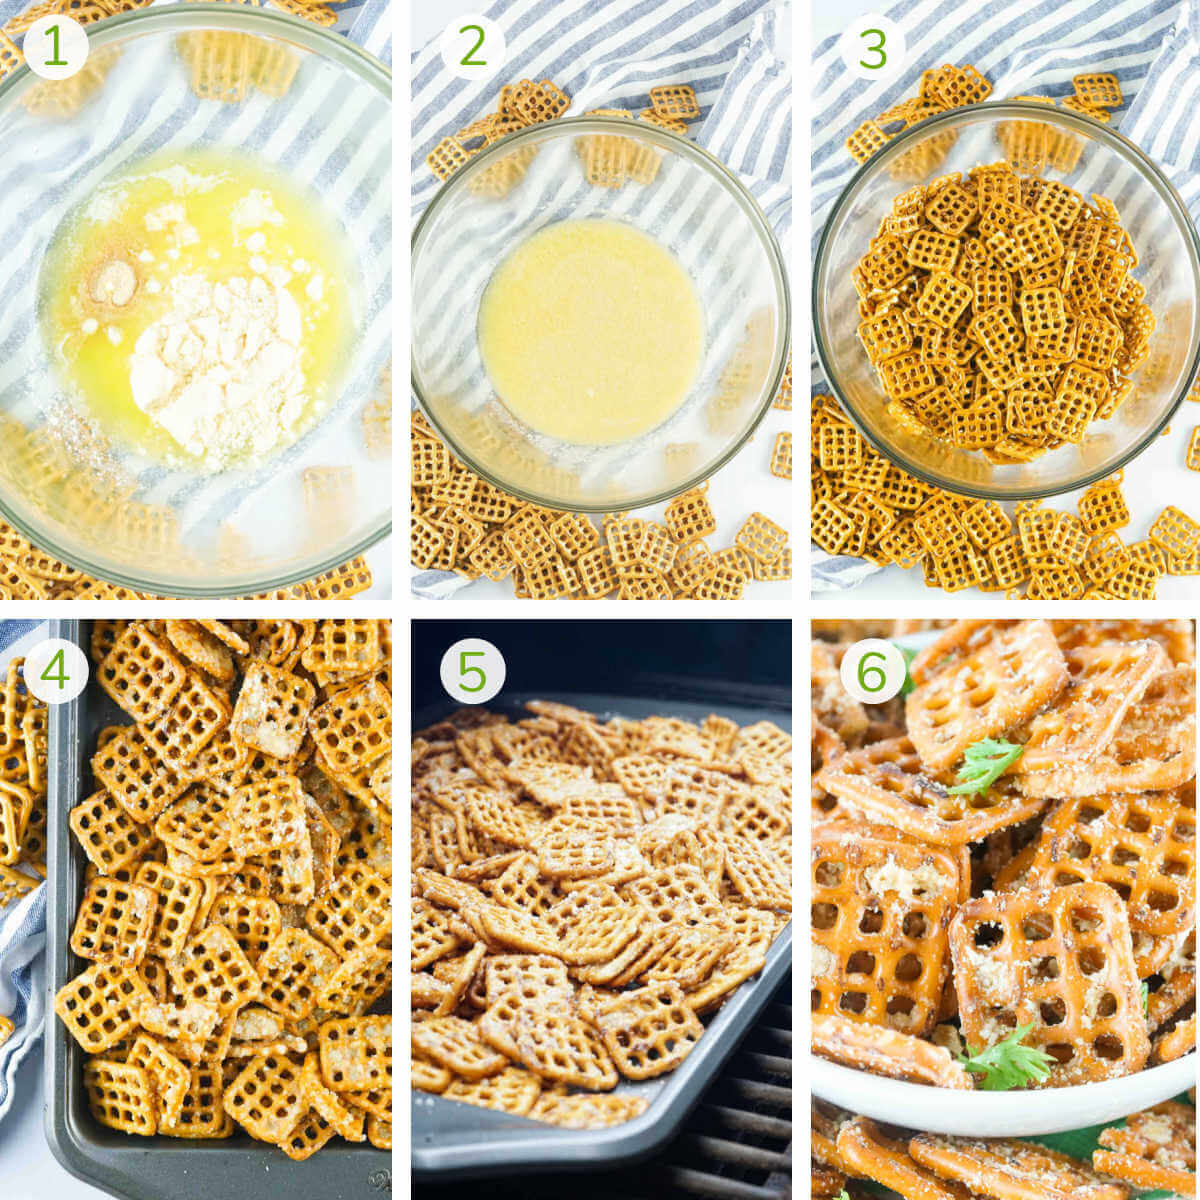 six photos showing how to prepare the seasoning, smoking and serving the pretzels.